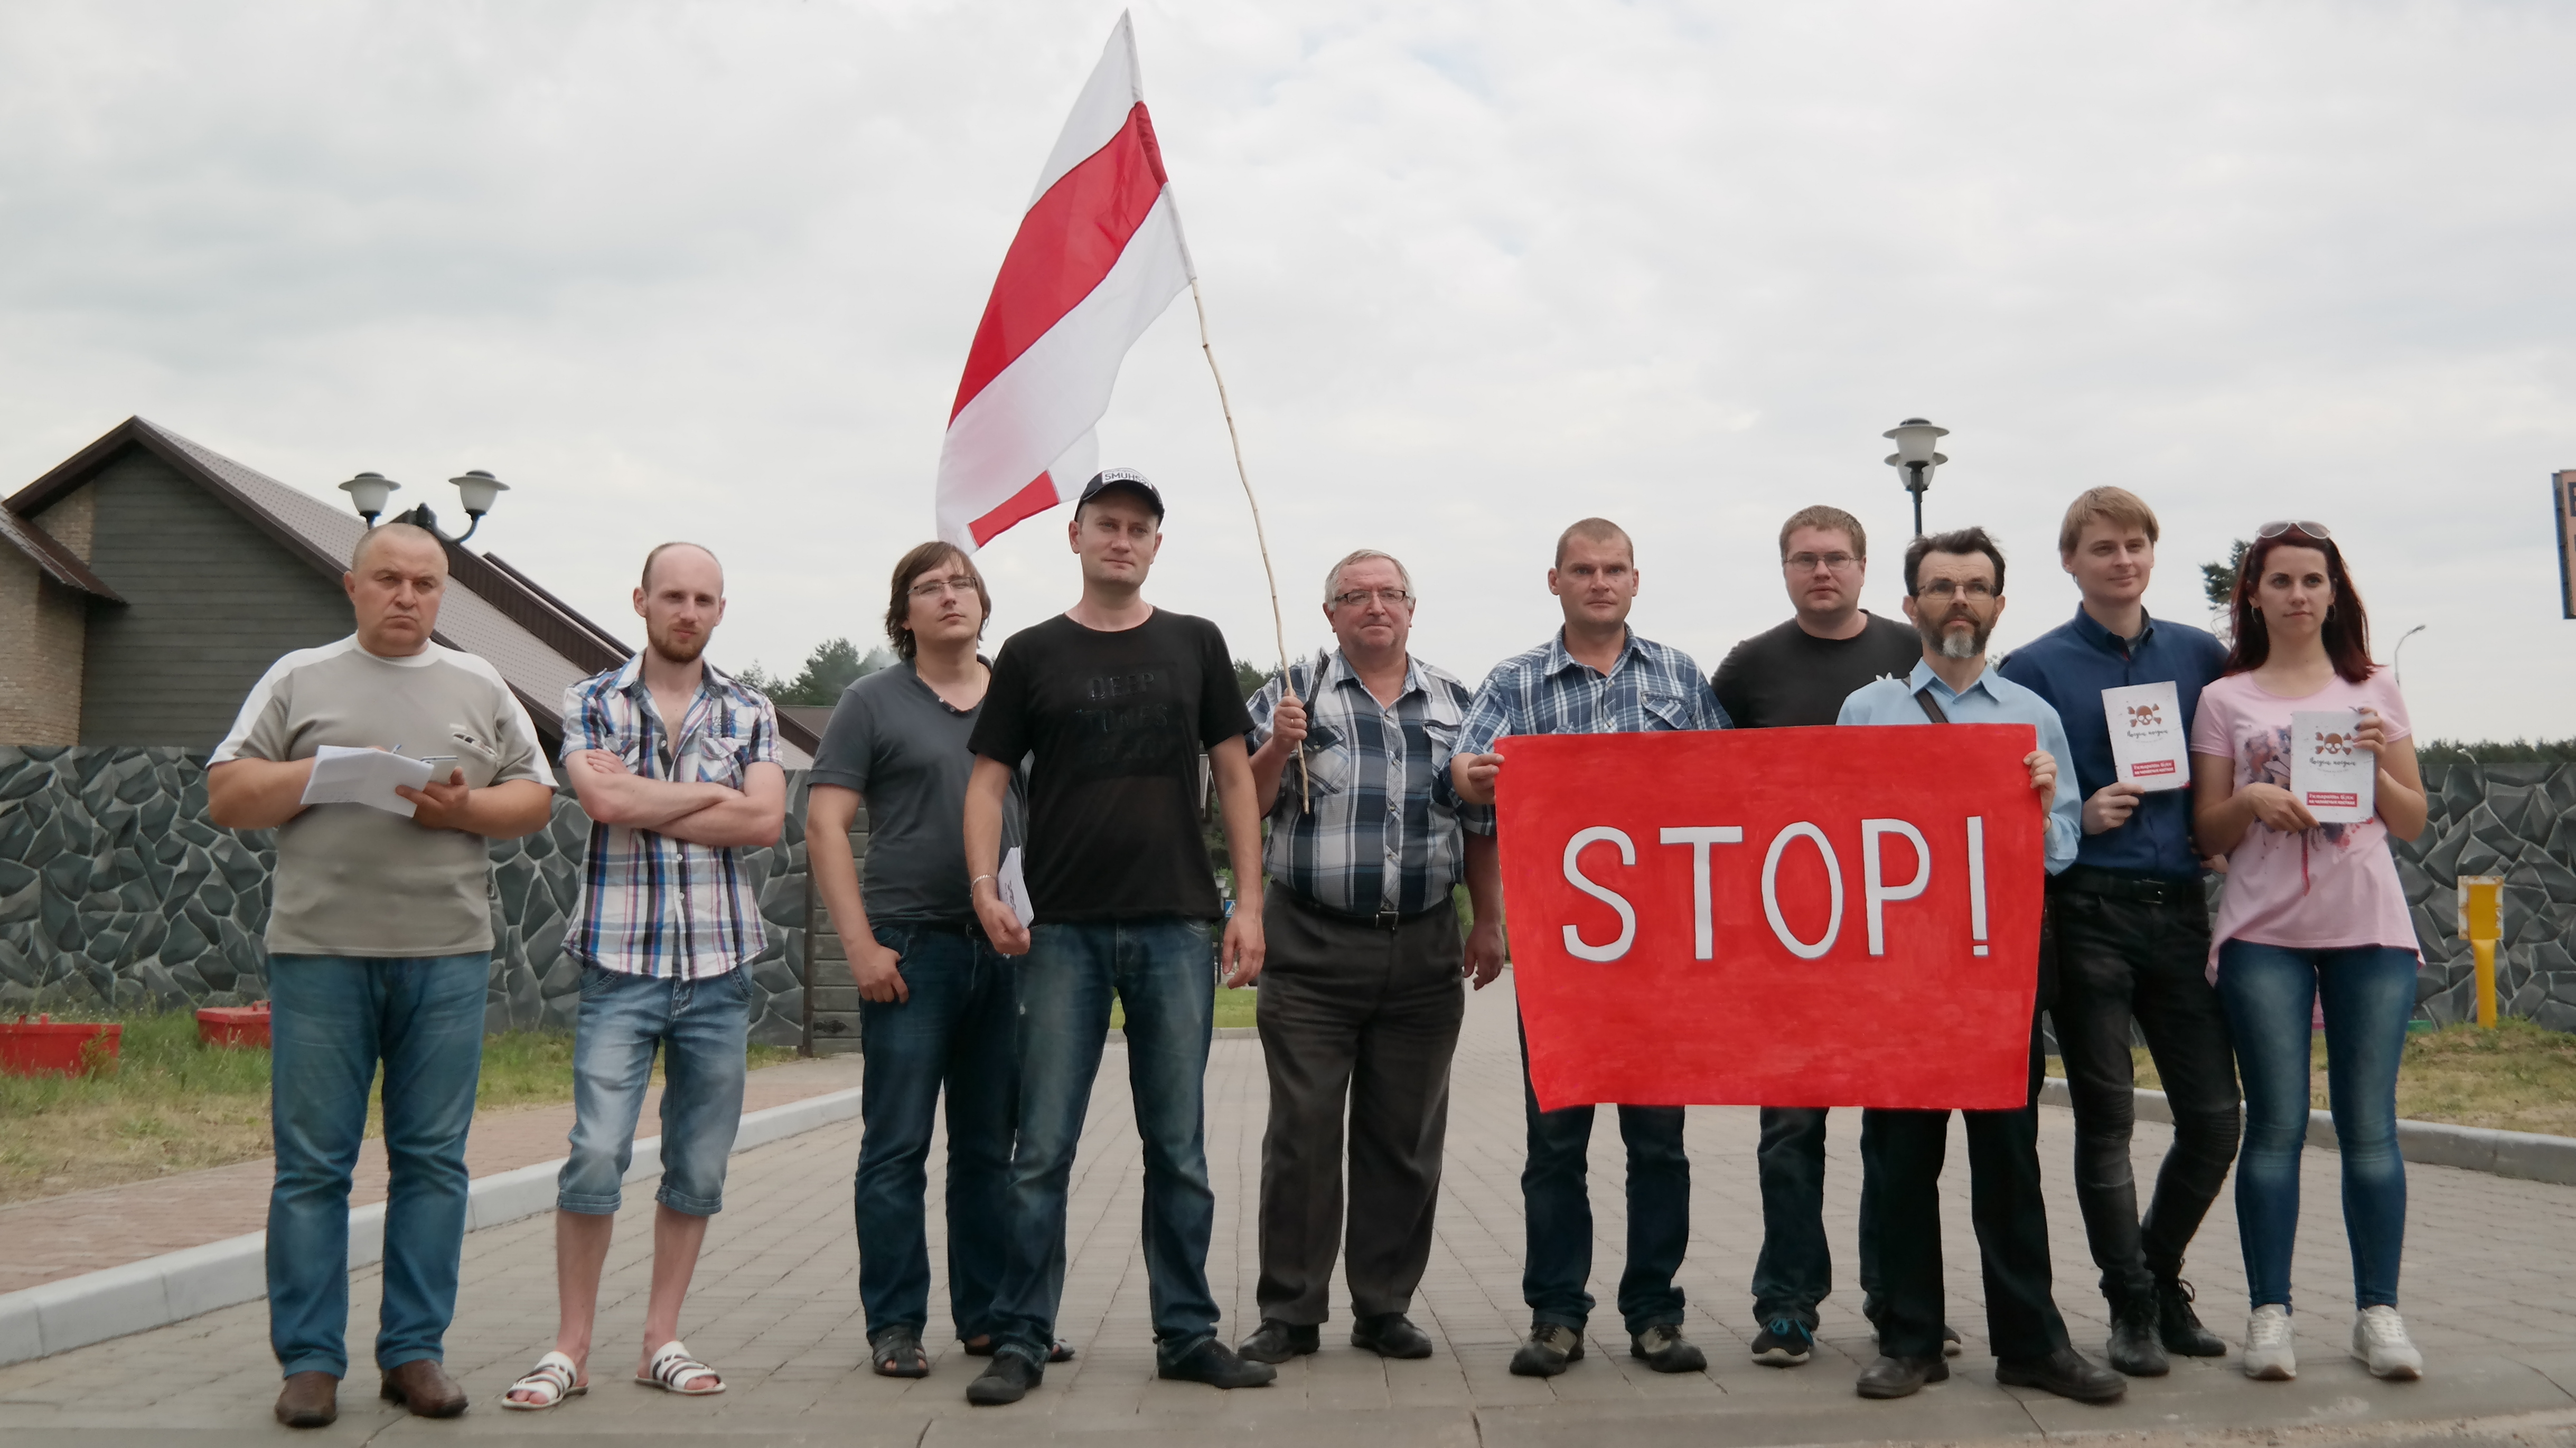 The group of protesters in Kurapaty. Source: svaboda.org